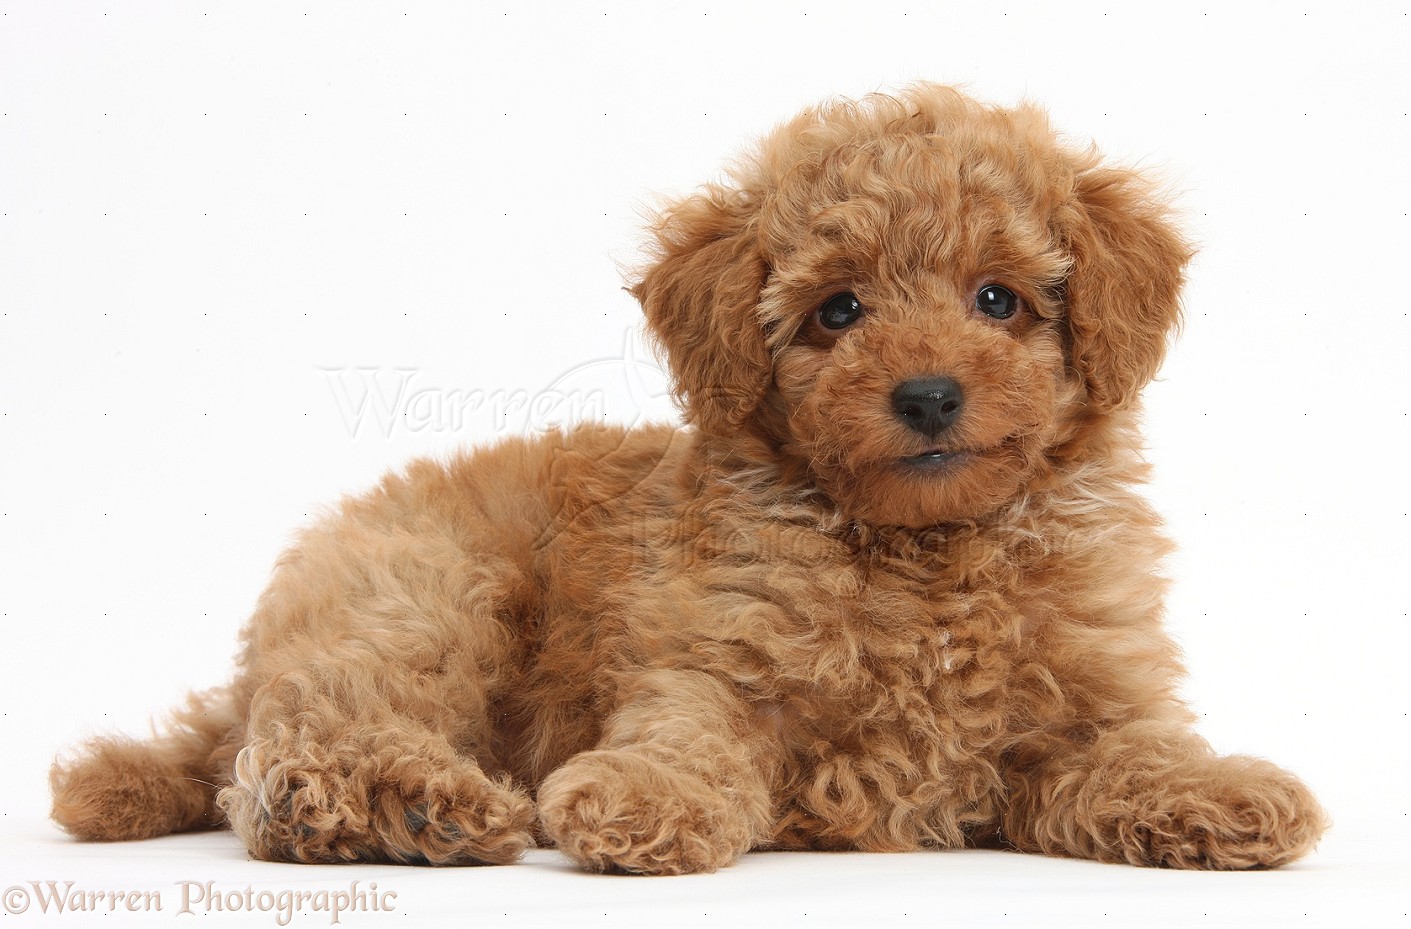 Dog: Cute red Toy Poodle puppy photo  WP38746